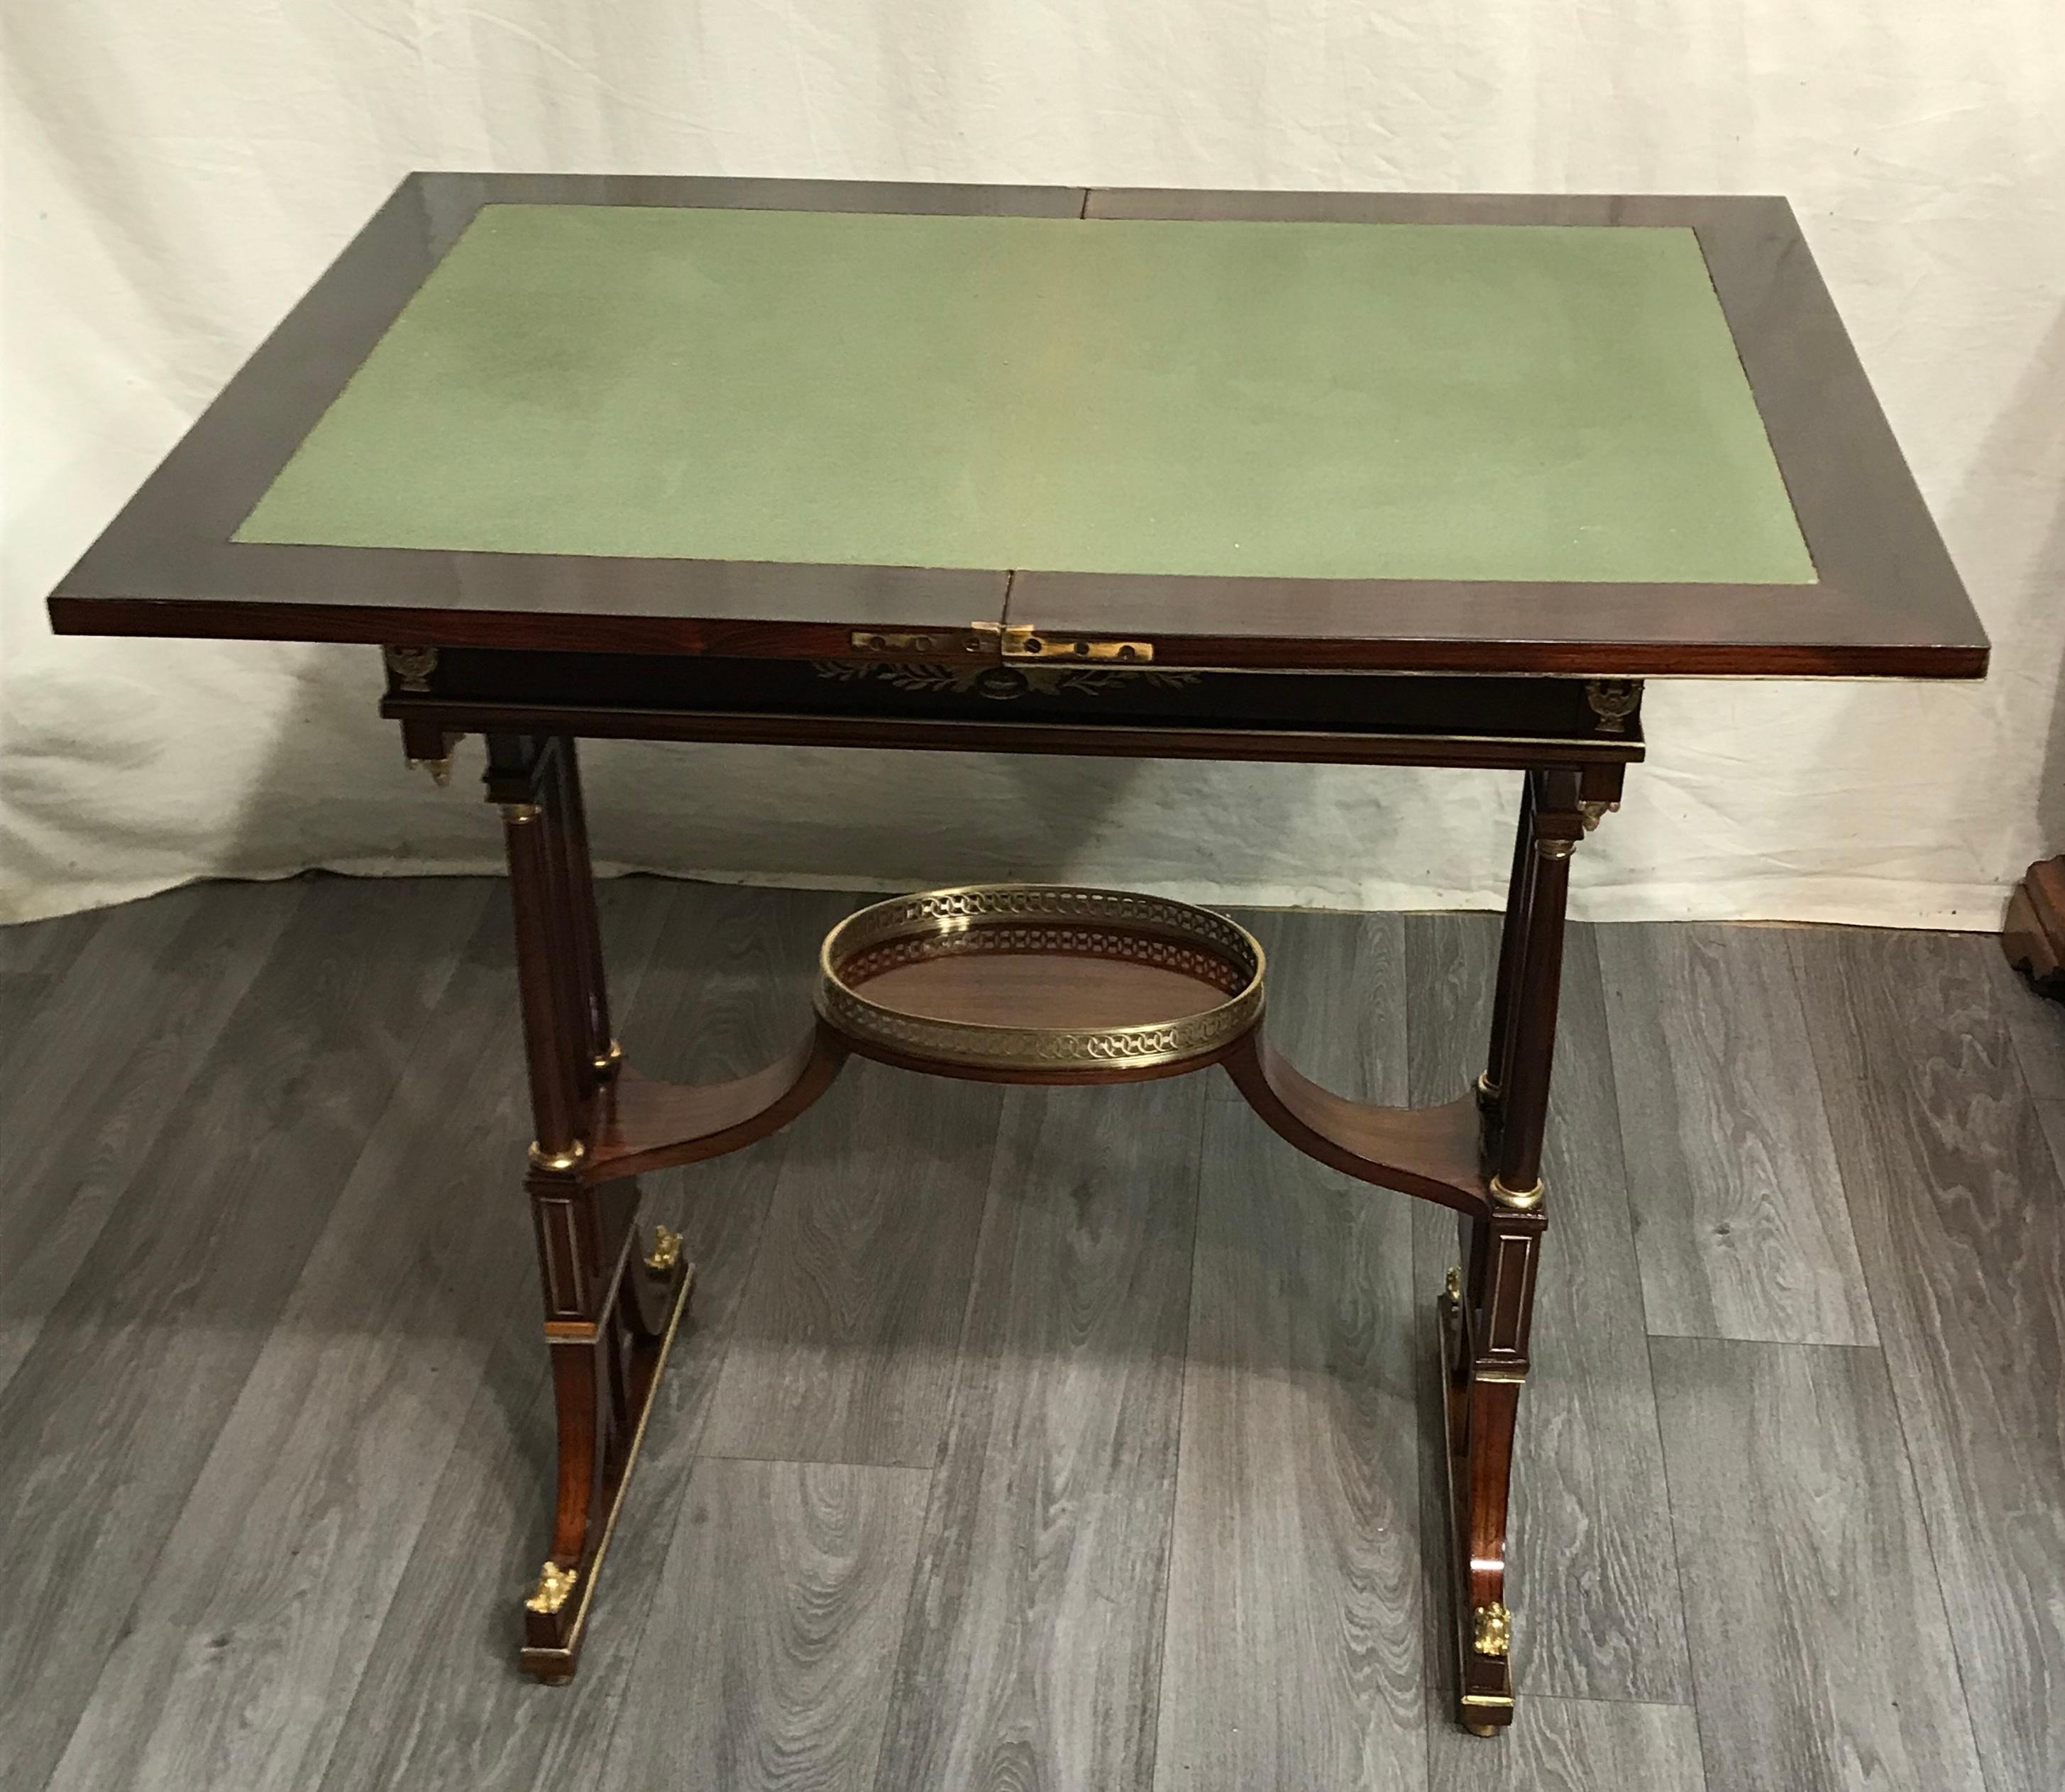 This unique card or tea table dates back to around 1880-1900 and comes from Vienna. It has an elegant mahogany veneer and gorgeous bronze fittings. The small table has a fold out top. The center of the unfolded top is covered with green leather. The